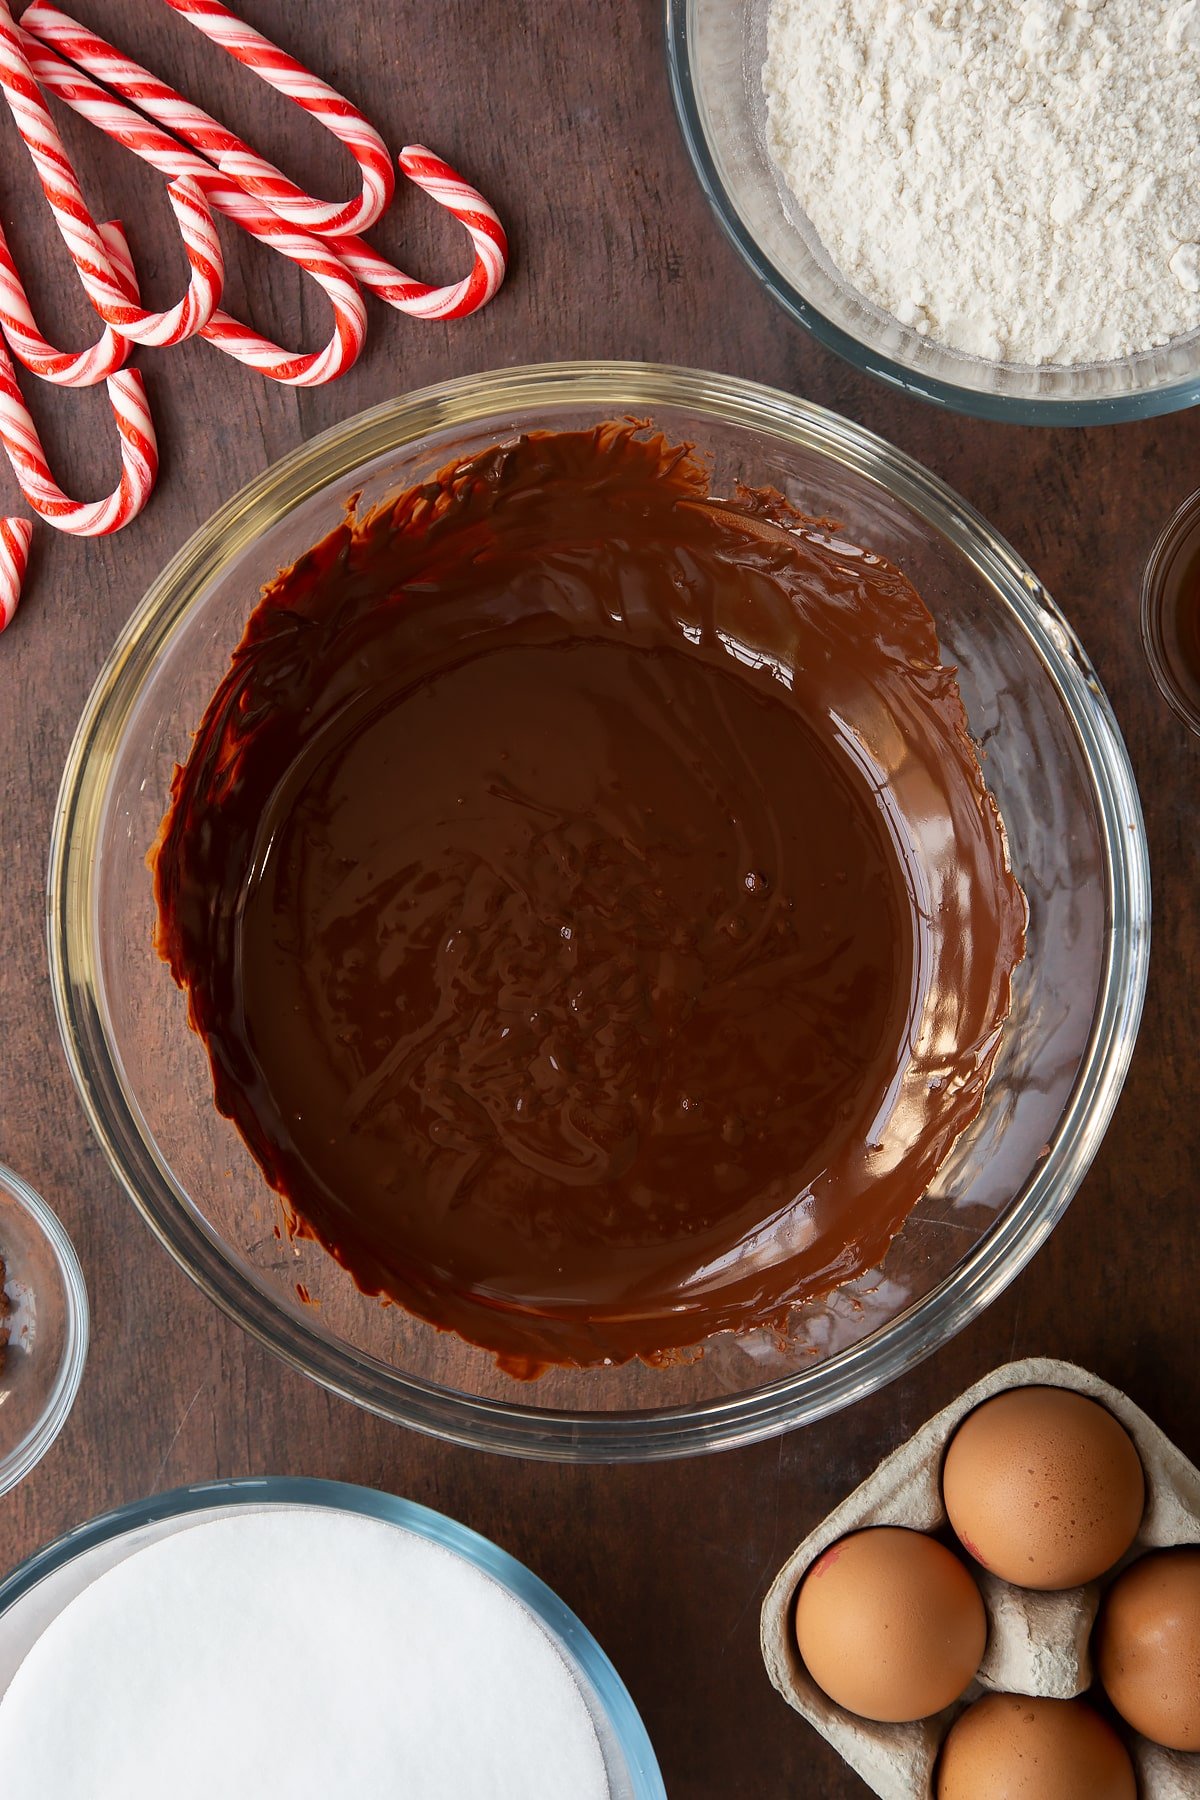 Melted dark chocolate in a glass bowl. Ingredients to make Candy cane brownies surround the bowl.